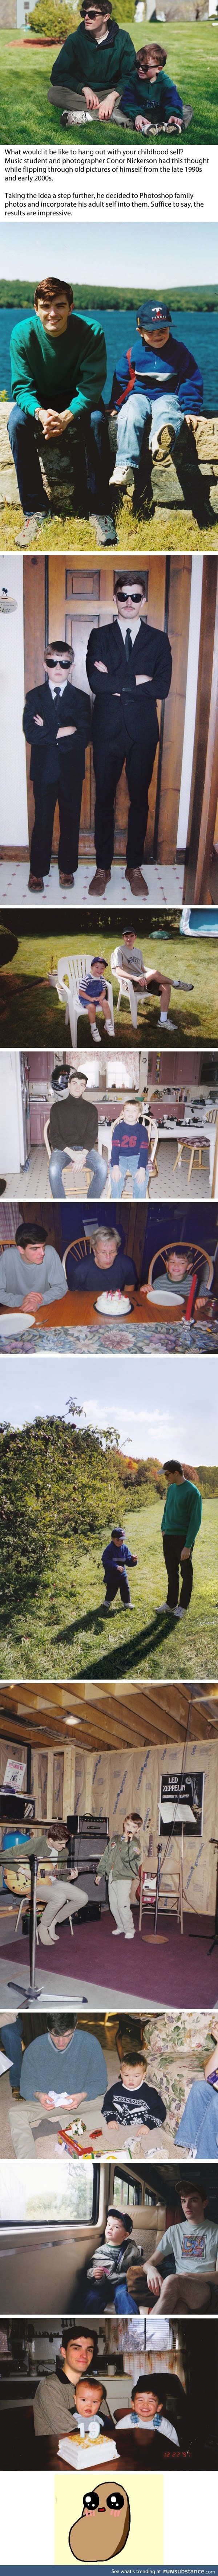 This man seamlessly photoshops himself into his old childhood photos